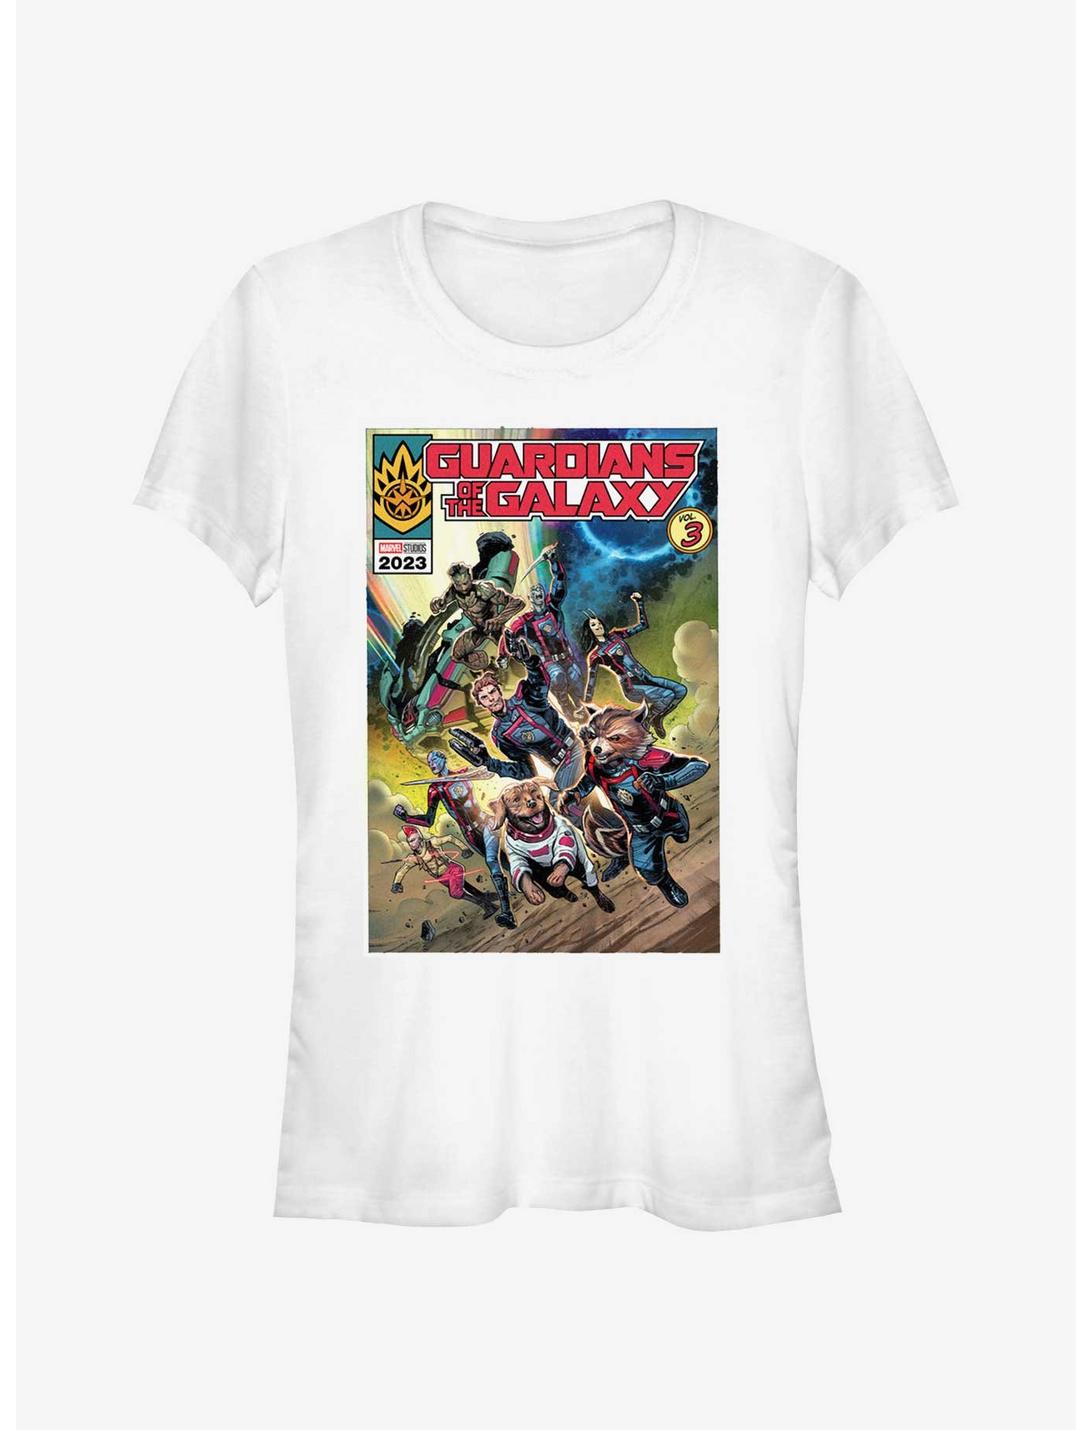 Marvel Guardians of the Galaxy Vol. 3 Comic Book Poster Girls T-Shirt, WHITE, hi-res